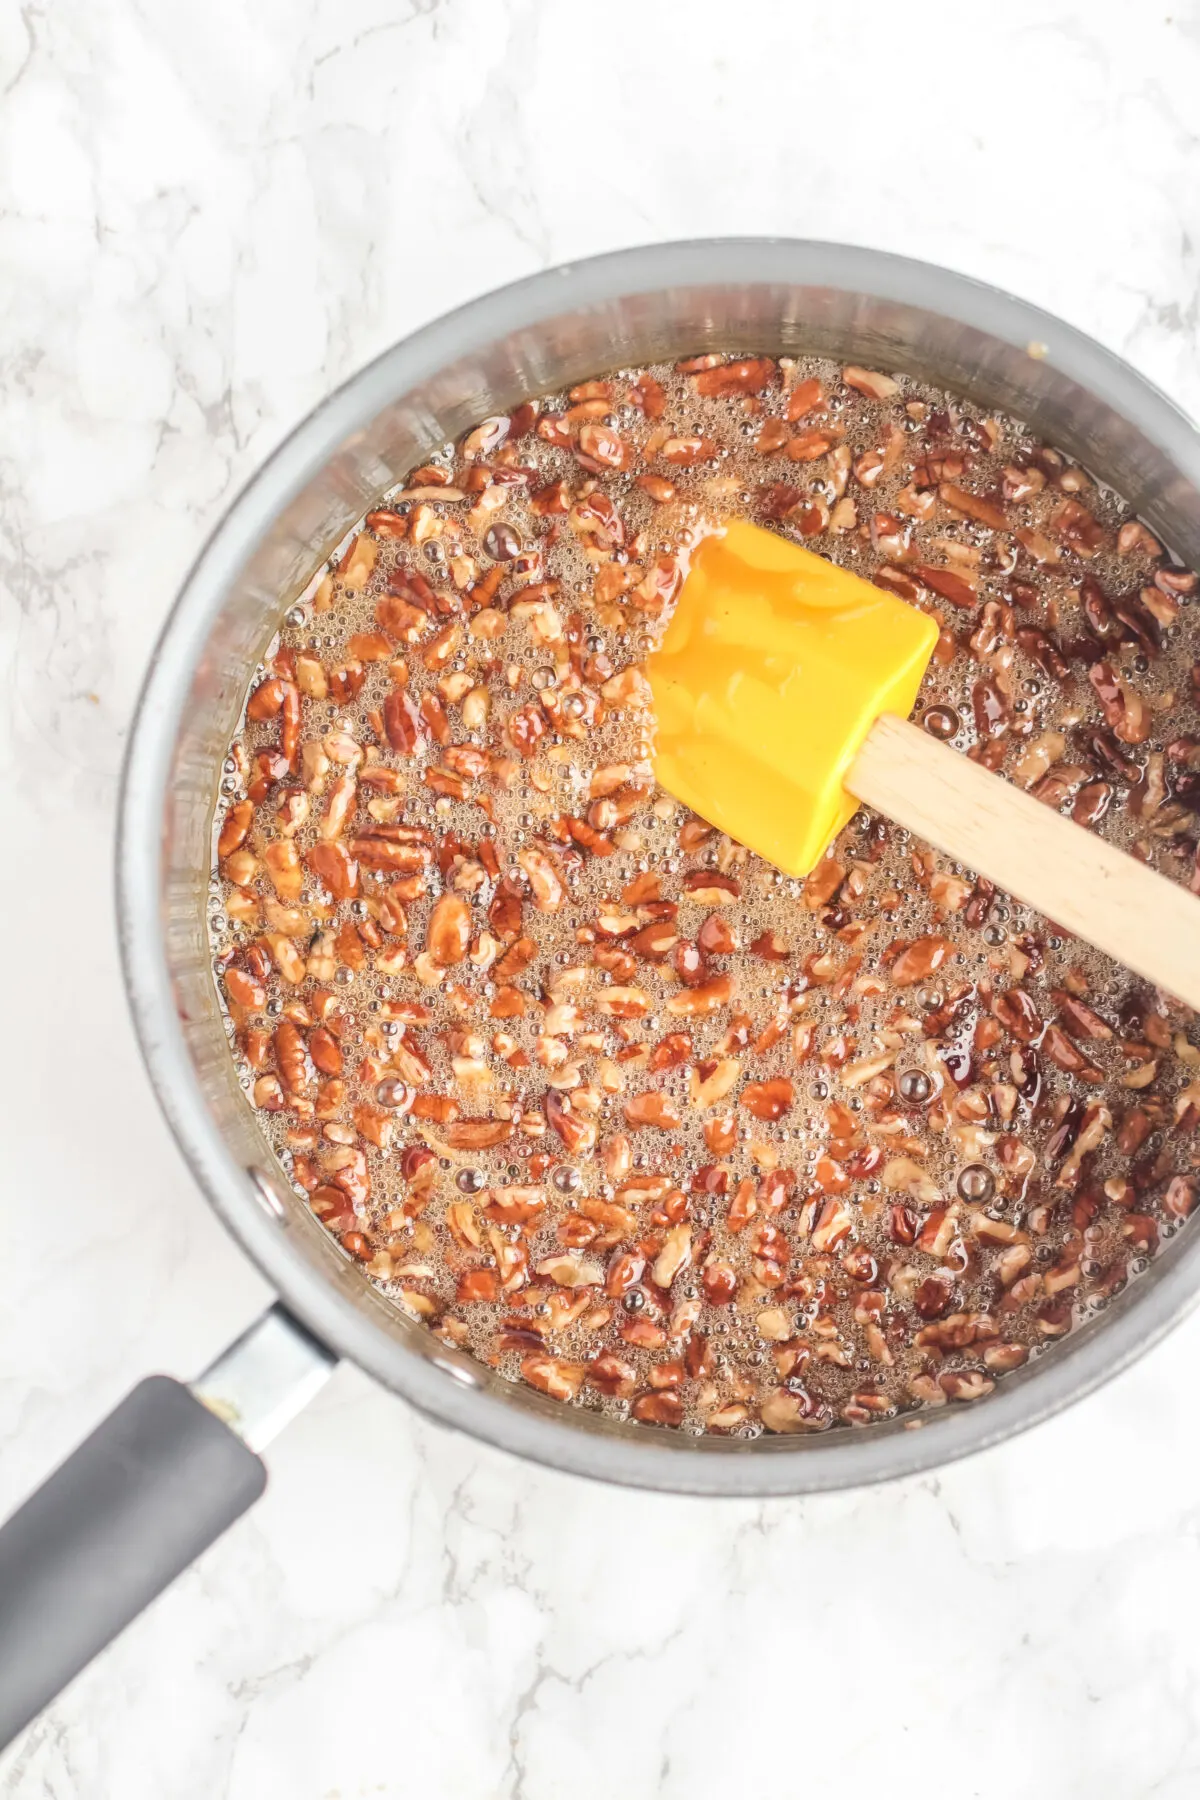 Pecans being stirred into the filling.